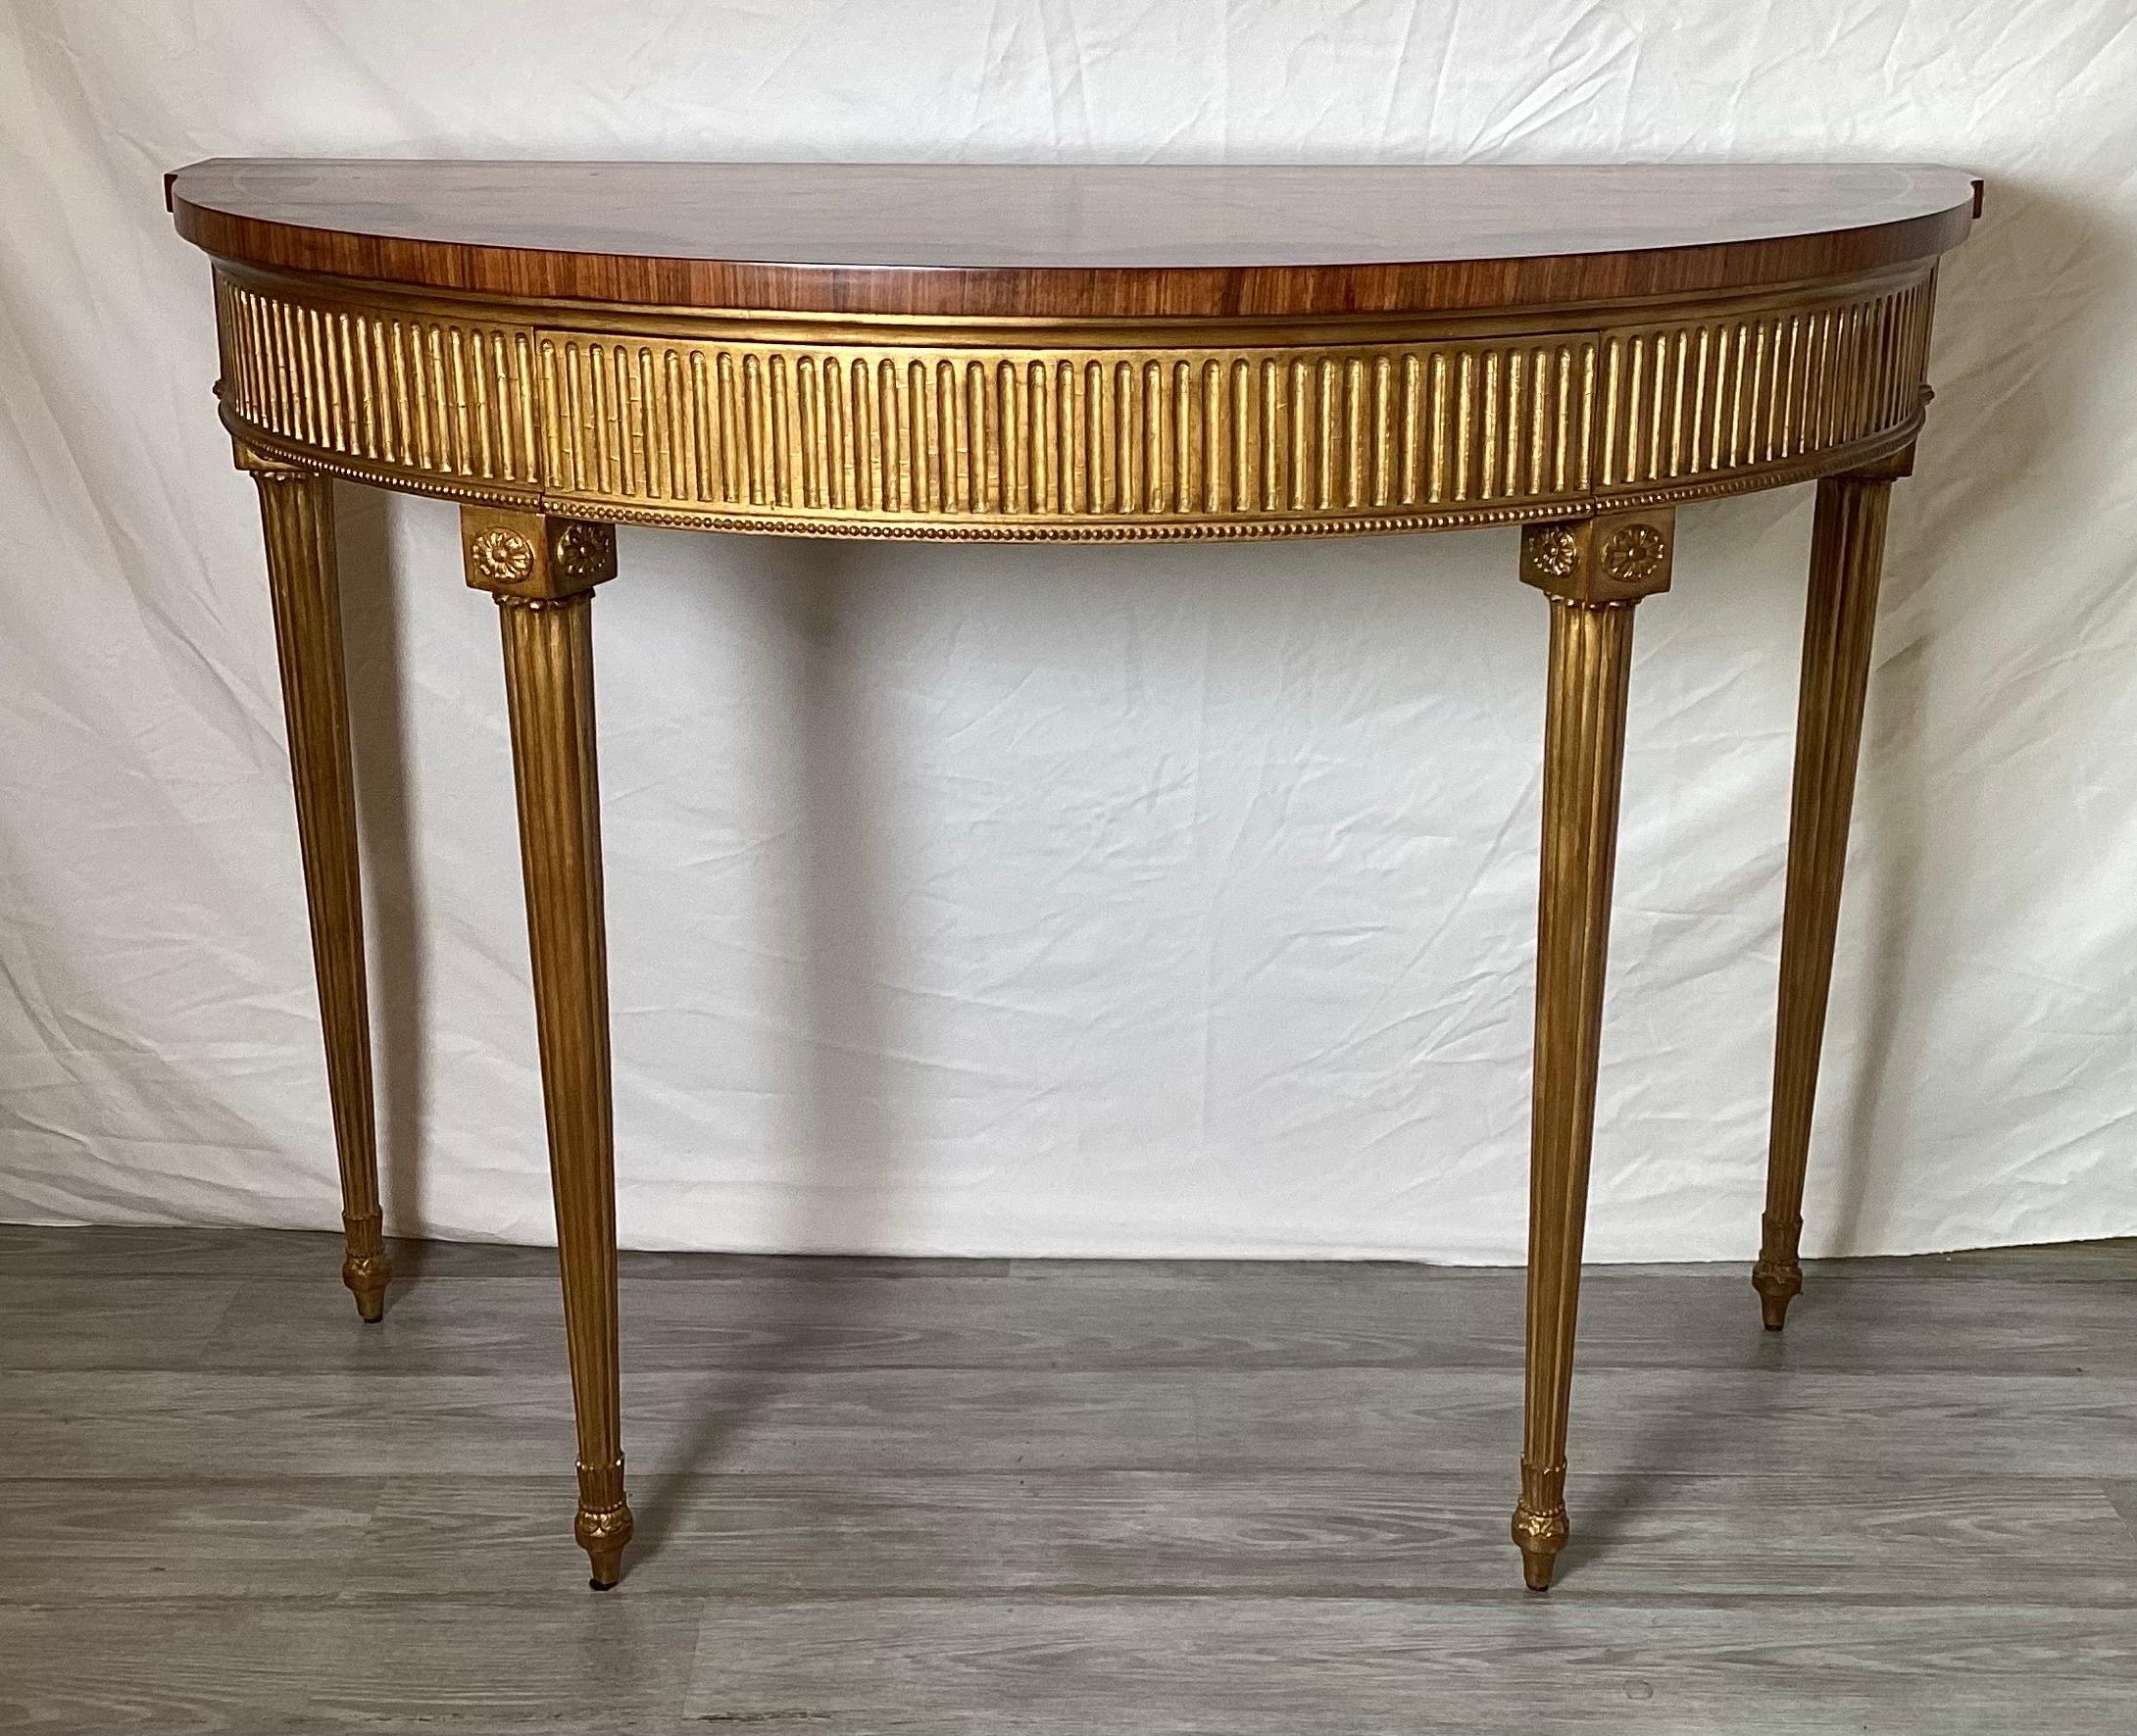 An elegant giltwood and inlaid Demilune console table by Theodore Alexander.  The giltwood apron and legs with fluted detailing with a concealed central drawer.  The top with an Adam style mahogany and satinwood inlaid design.  The generous size is